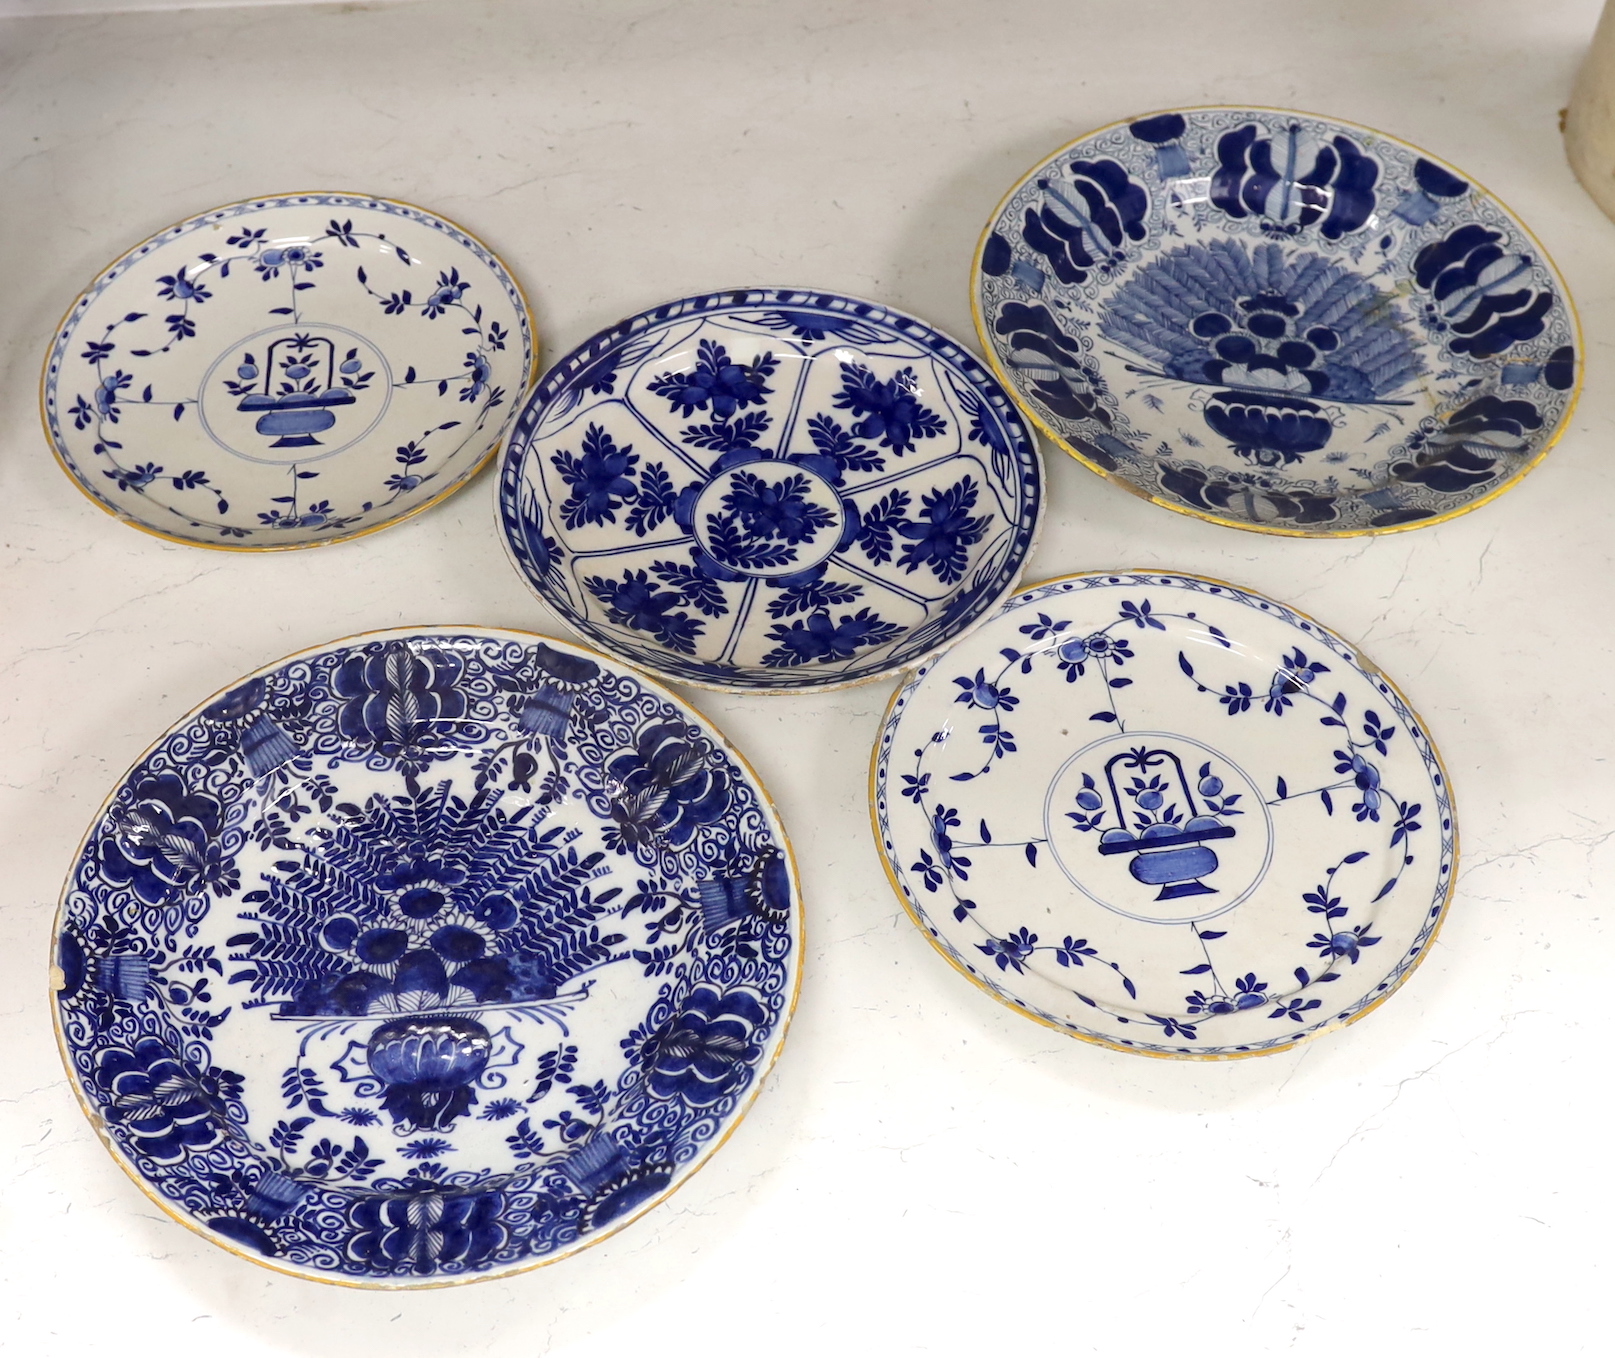 Five 18th century Delft blue and white plates, largest 31cm